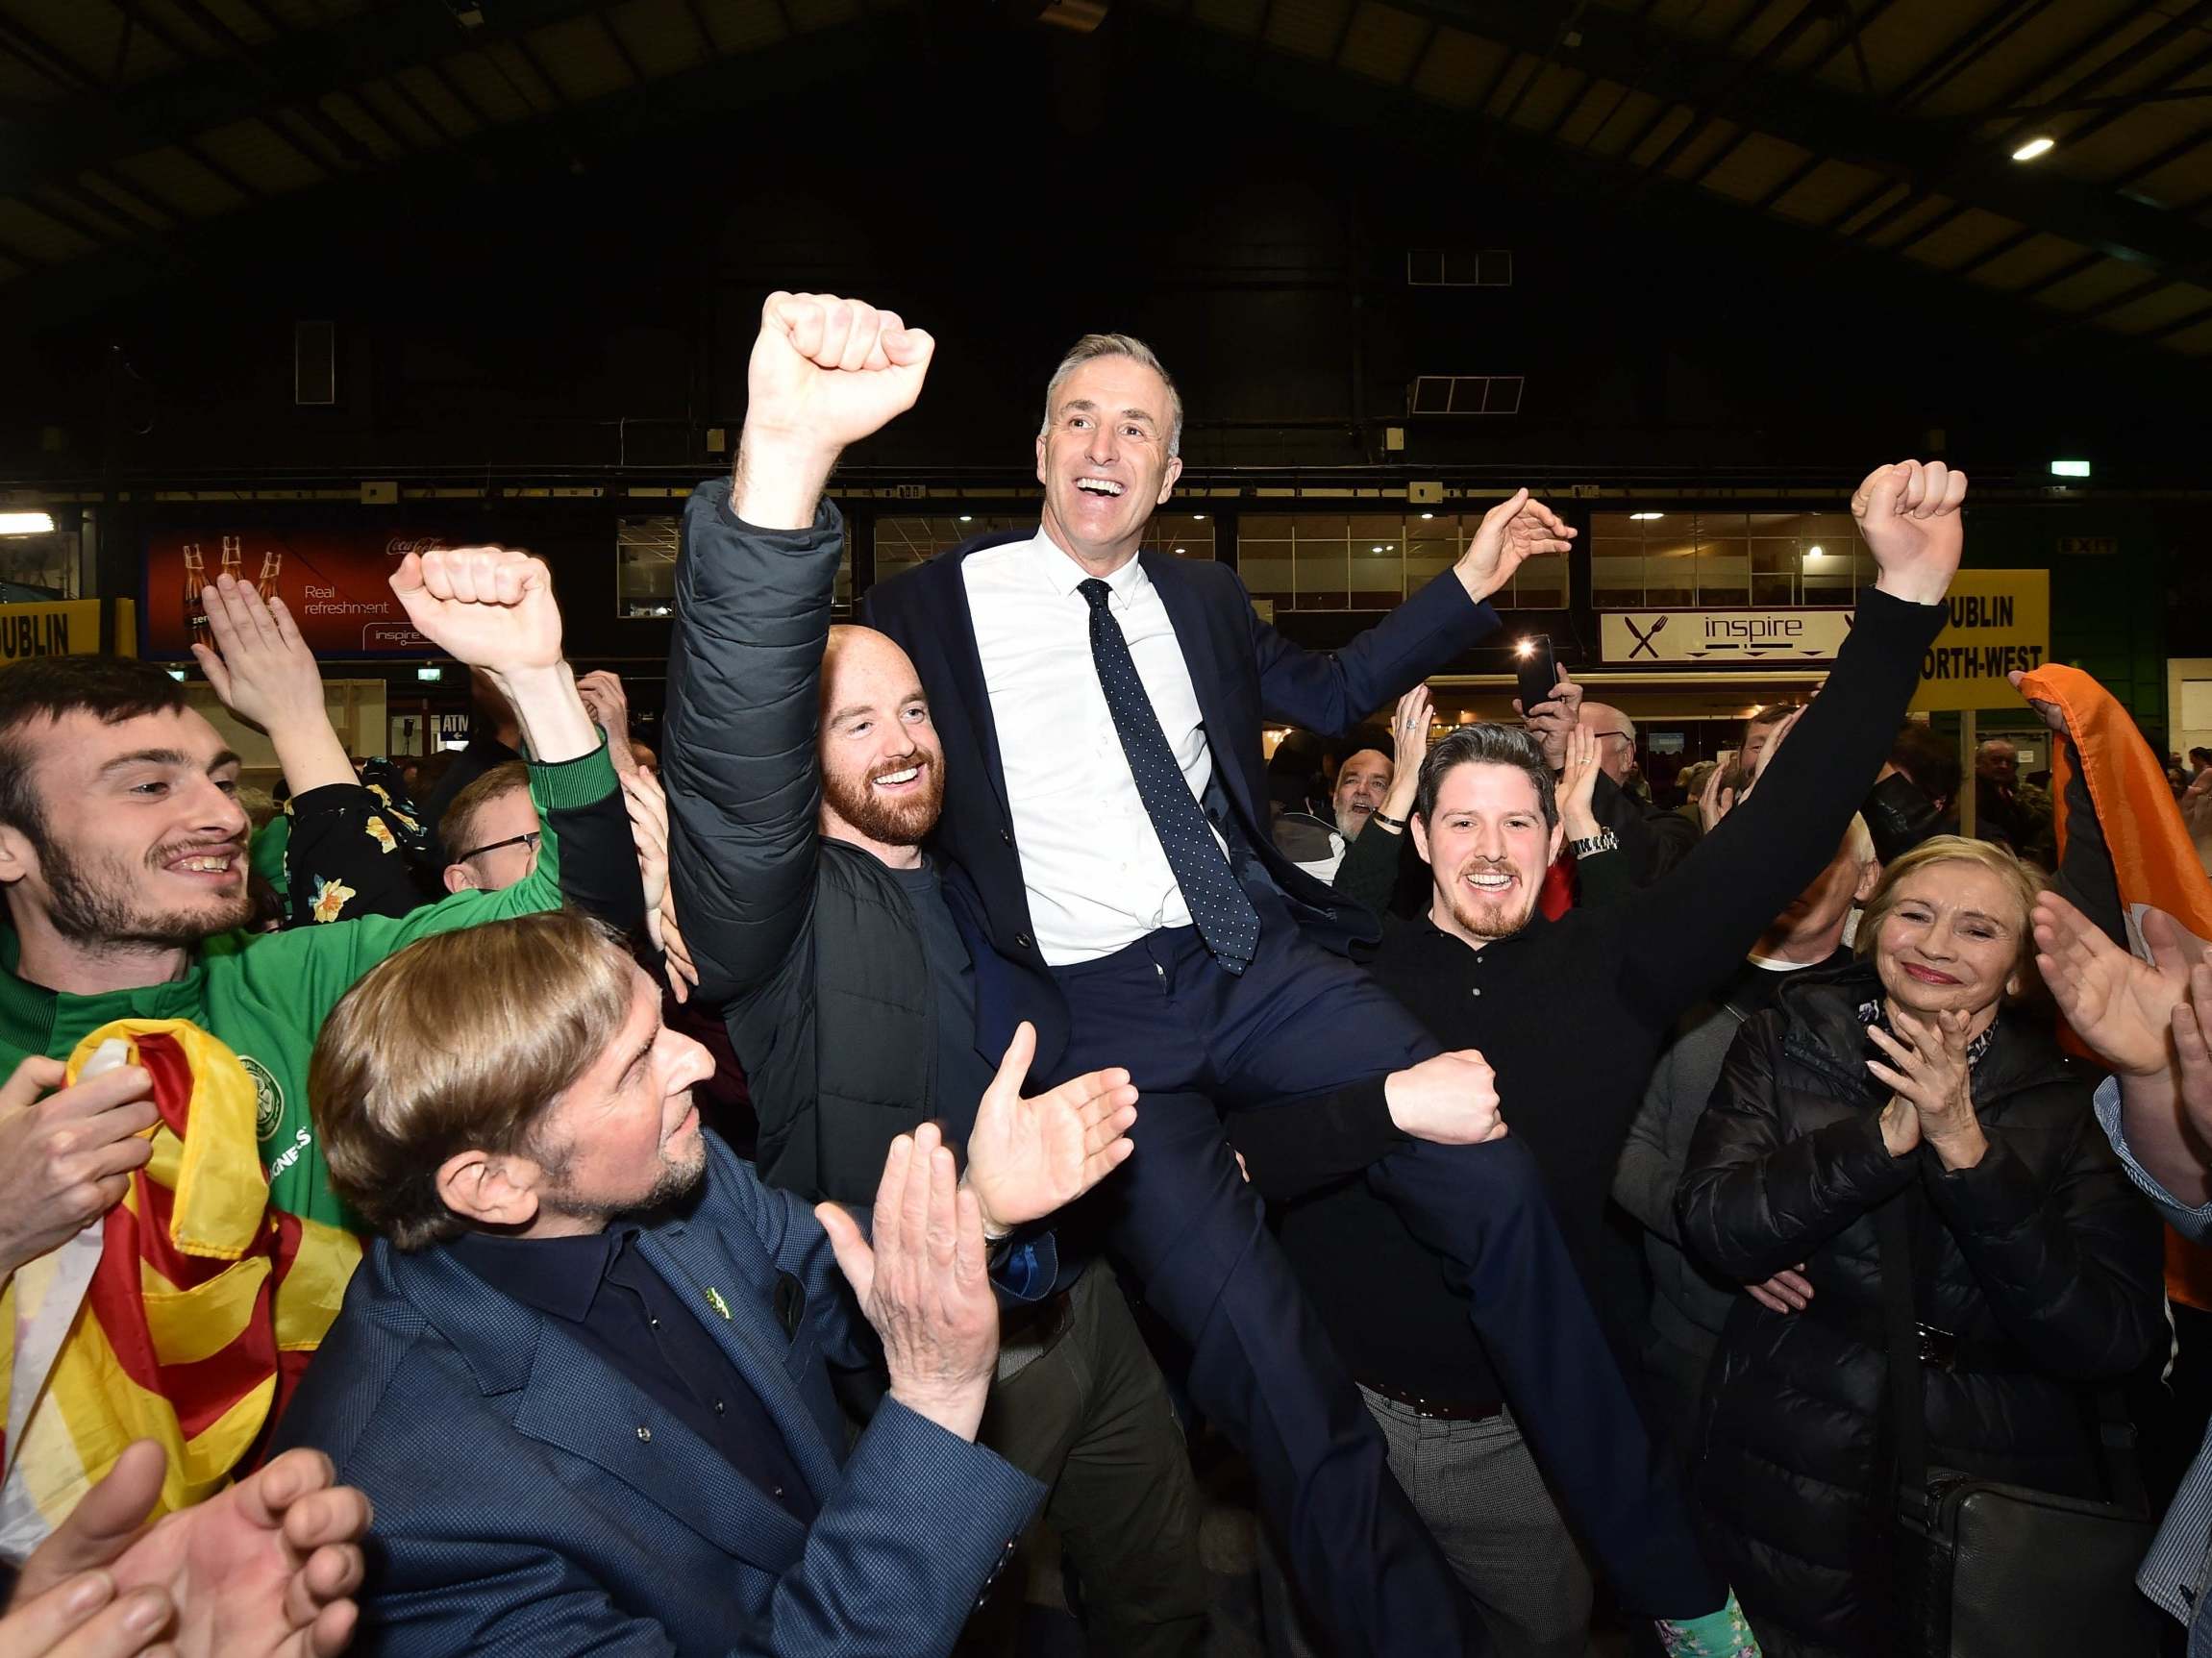 Newly elected Sinn Fein candidate Chris Andrews is held aloft by supporters